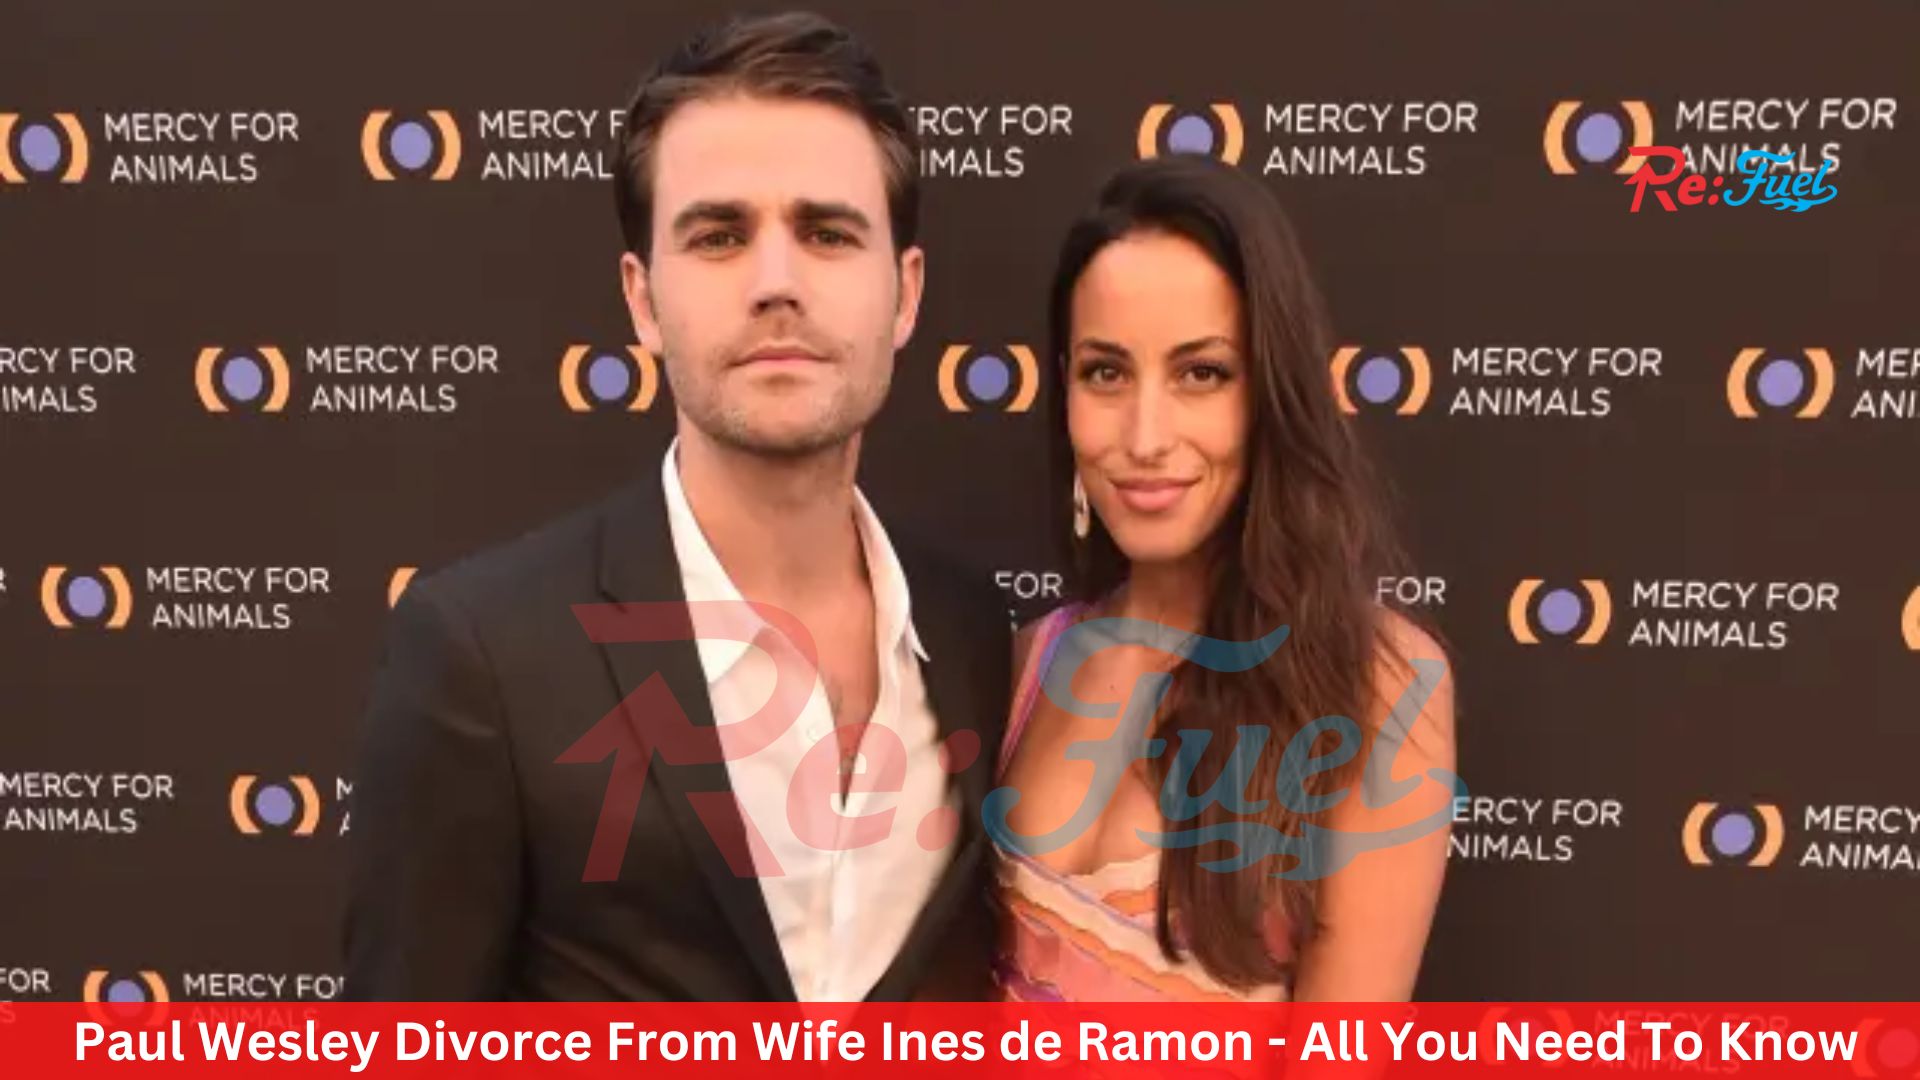 Paul Wesley Divorce From Wife Ines de Ramon - All You Need To Know